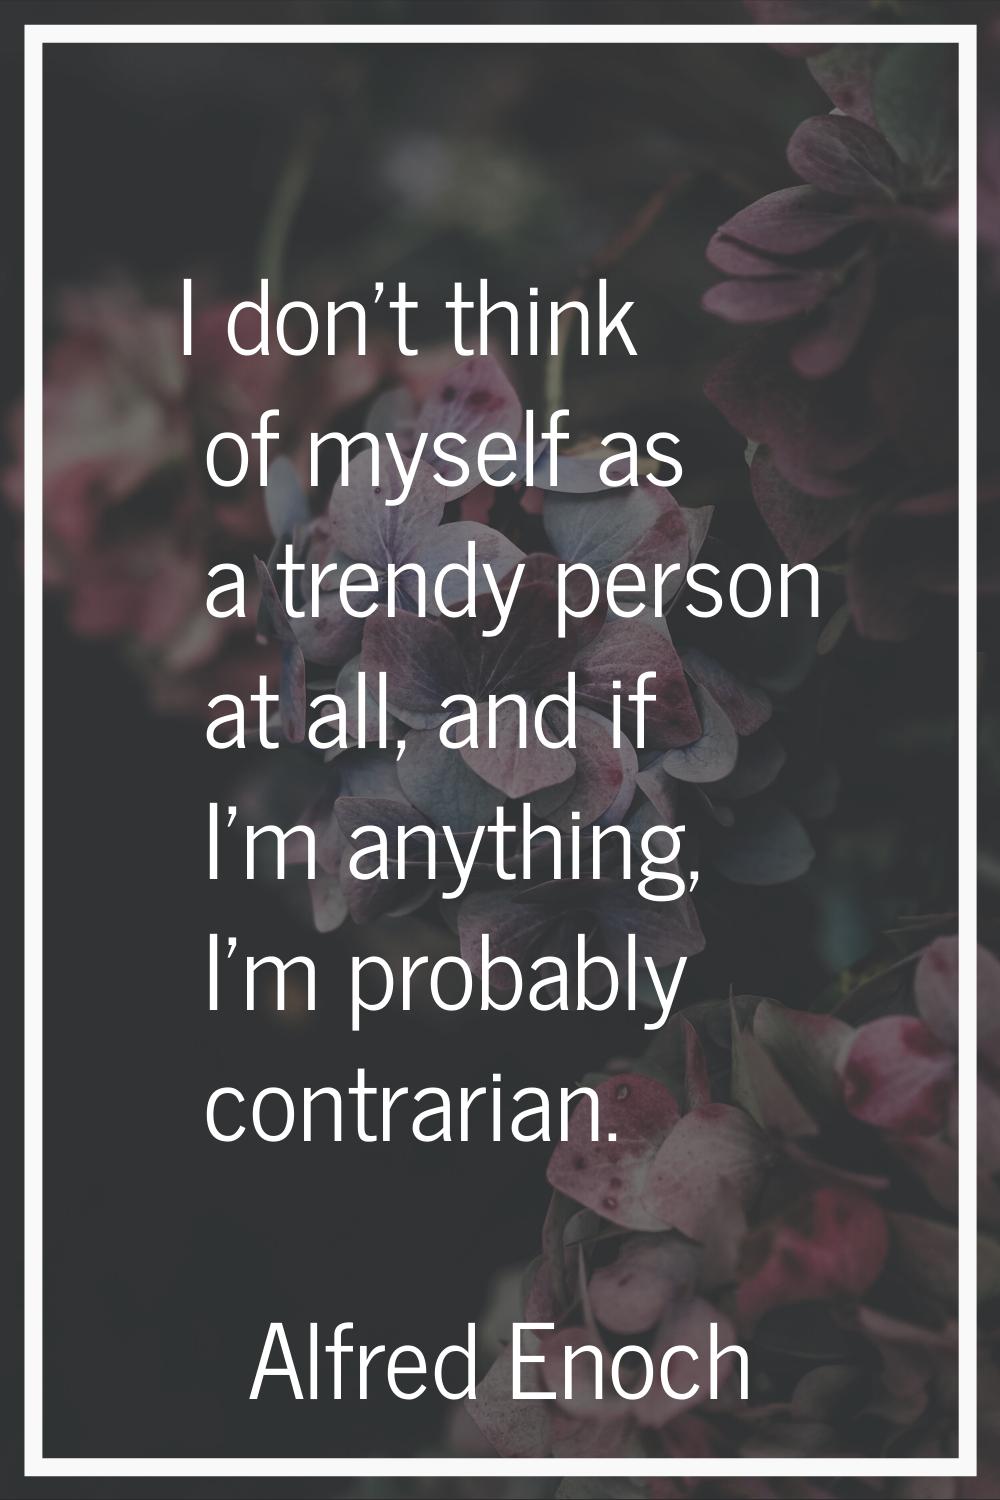 I don't think of myself as a trendy person at all, and if I'm anything, I'm probably contrarian.